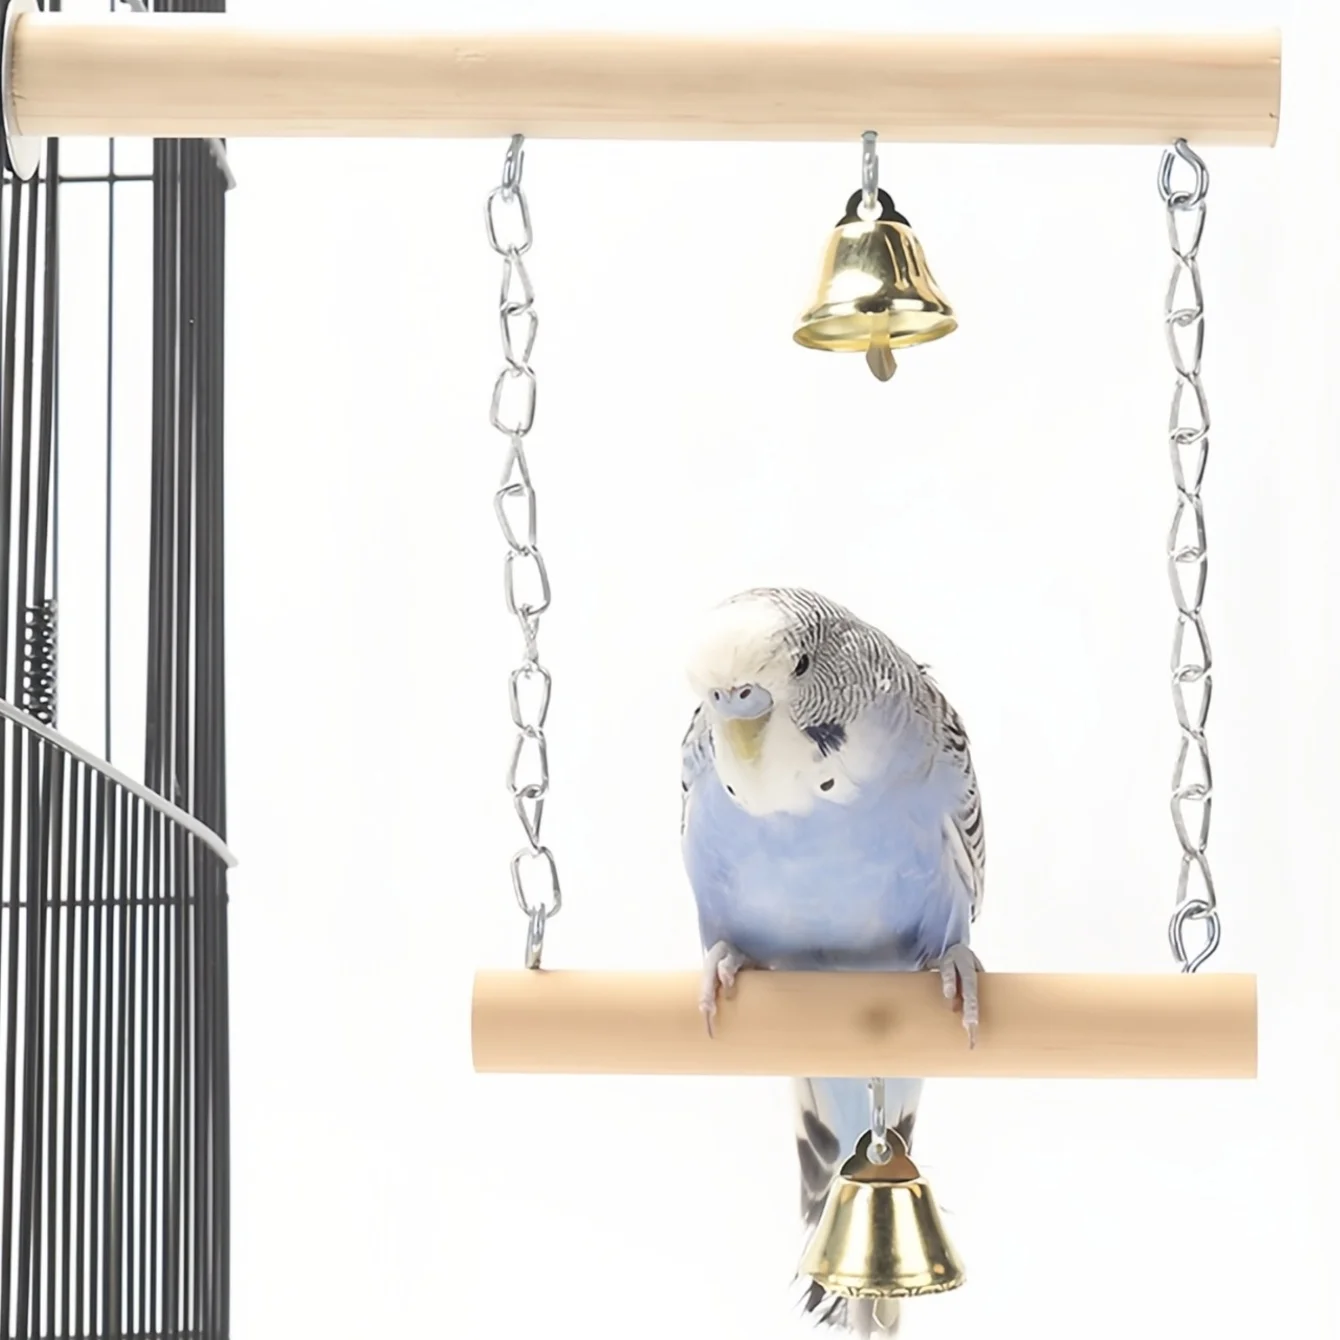 Double Layered Wood Swing Bridge Toy with Bell Pet Bird Training Grinding Parrot Stand Rack Swing Toy Perches Cage Accessories